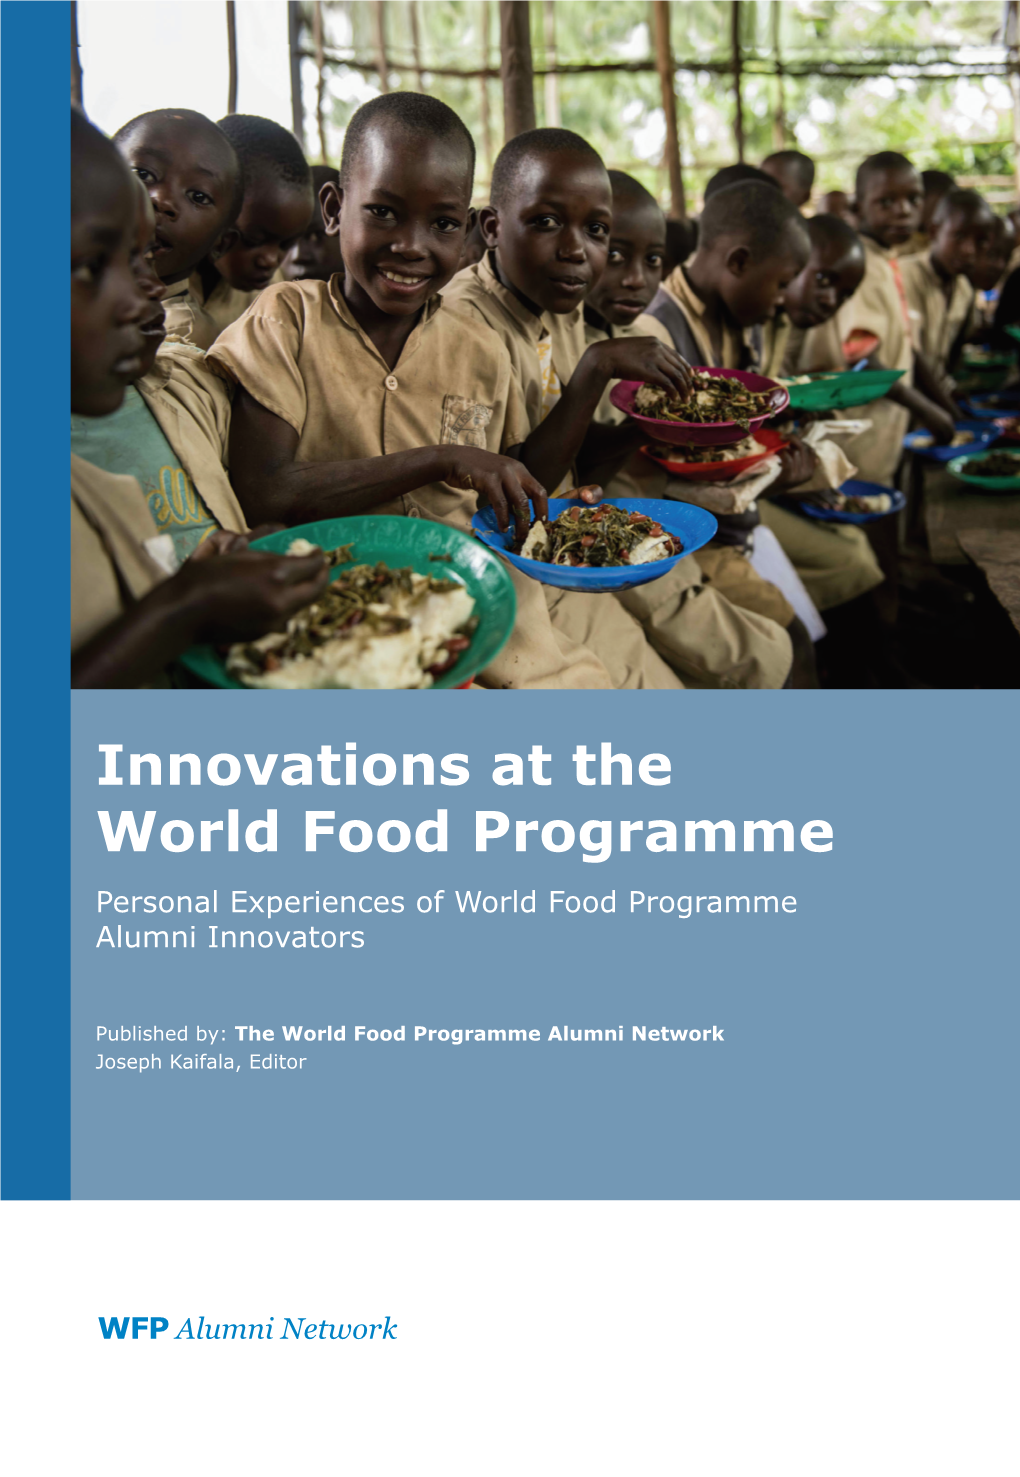 Innovations at the World Food Programme